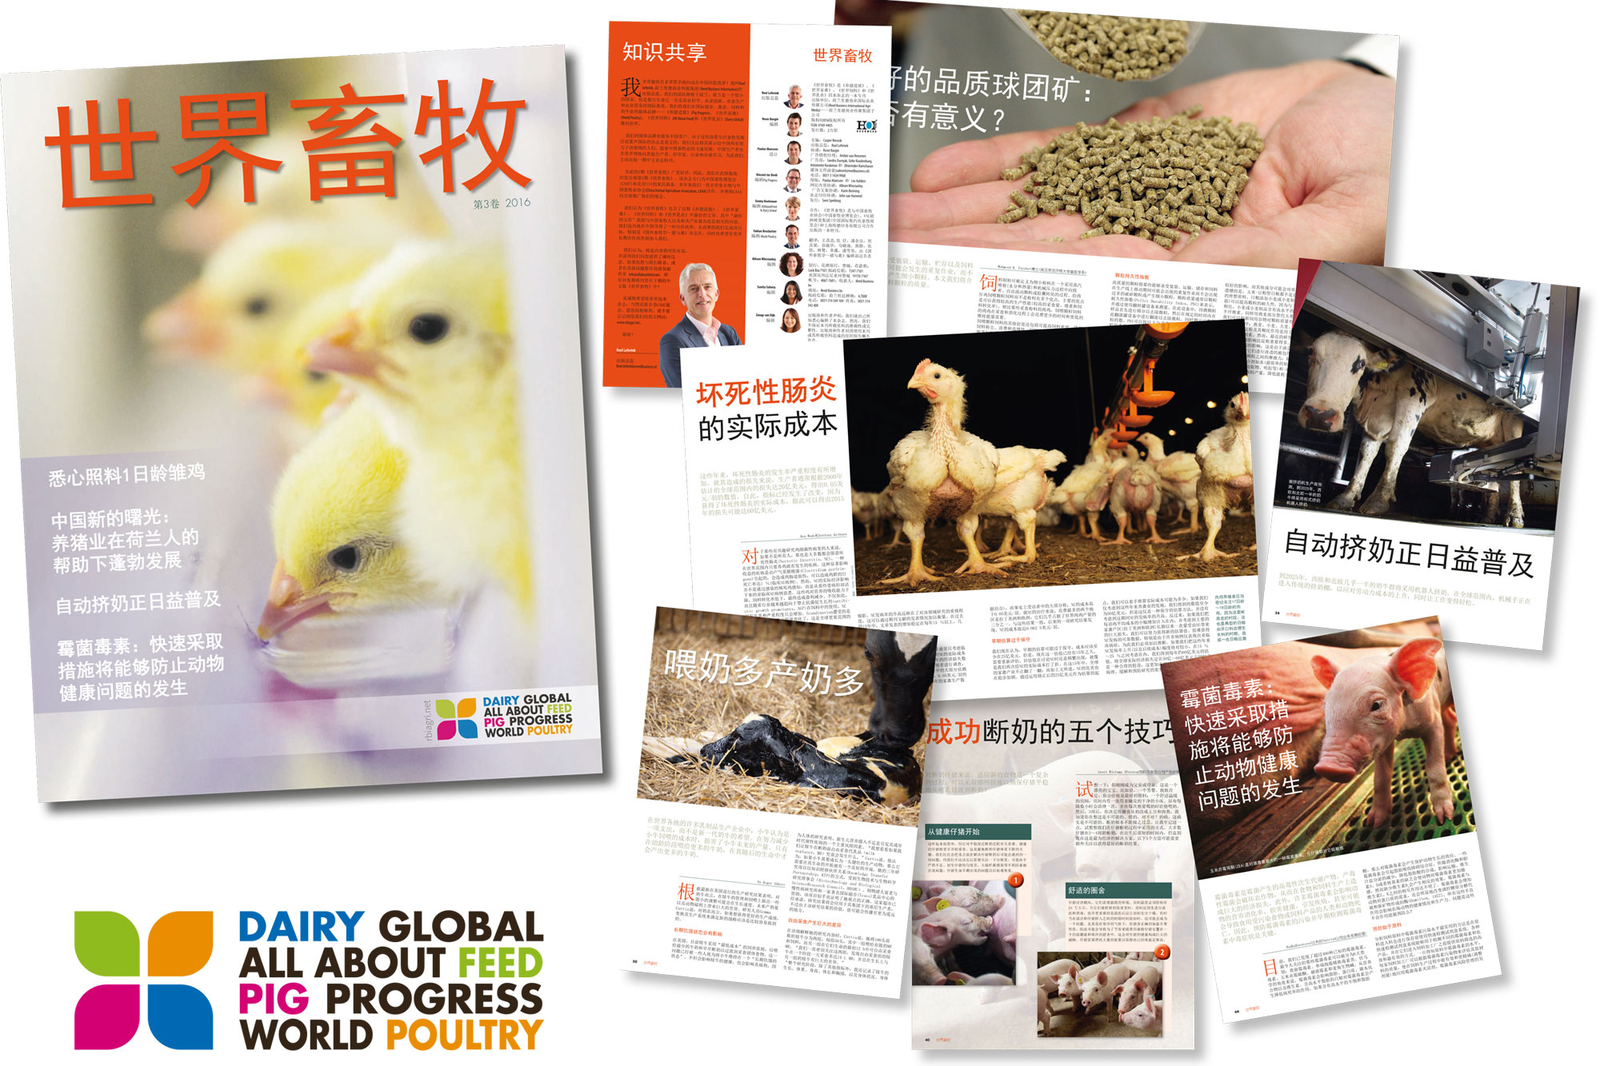 All About Feed publishes 3rd Chinese special